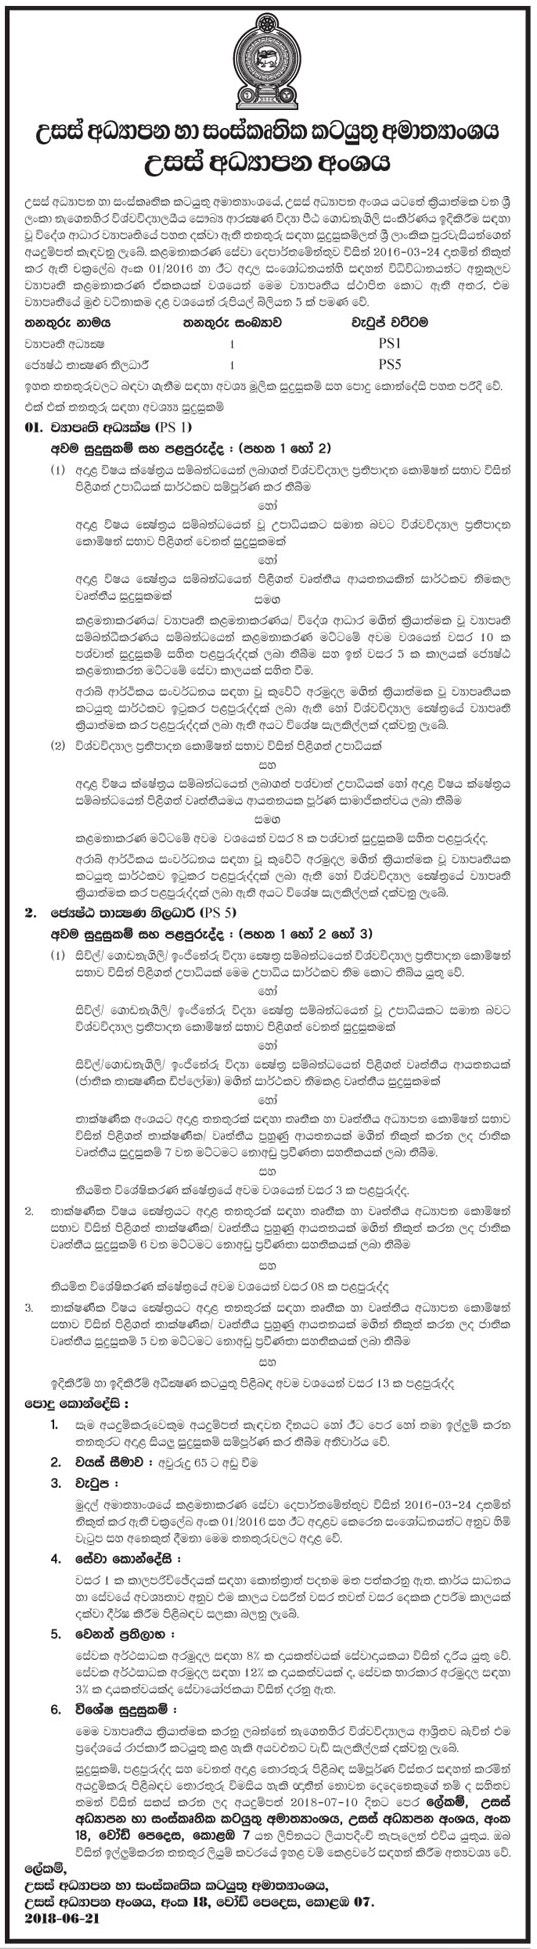 Project Director / Senior Technical Officer - Ministry of Higher Education Jobs Vacancies Application Form